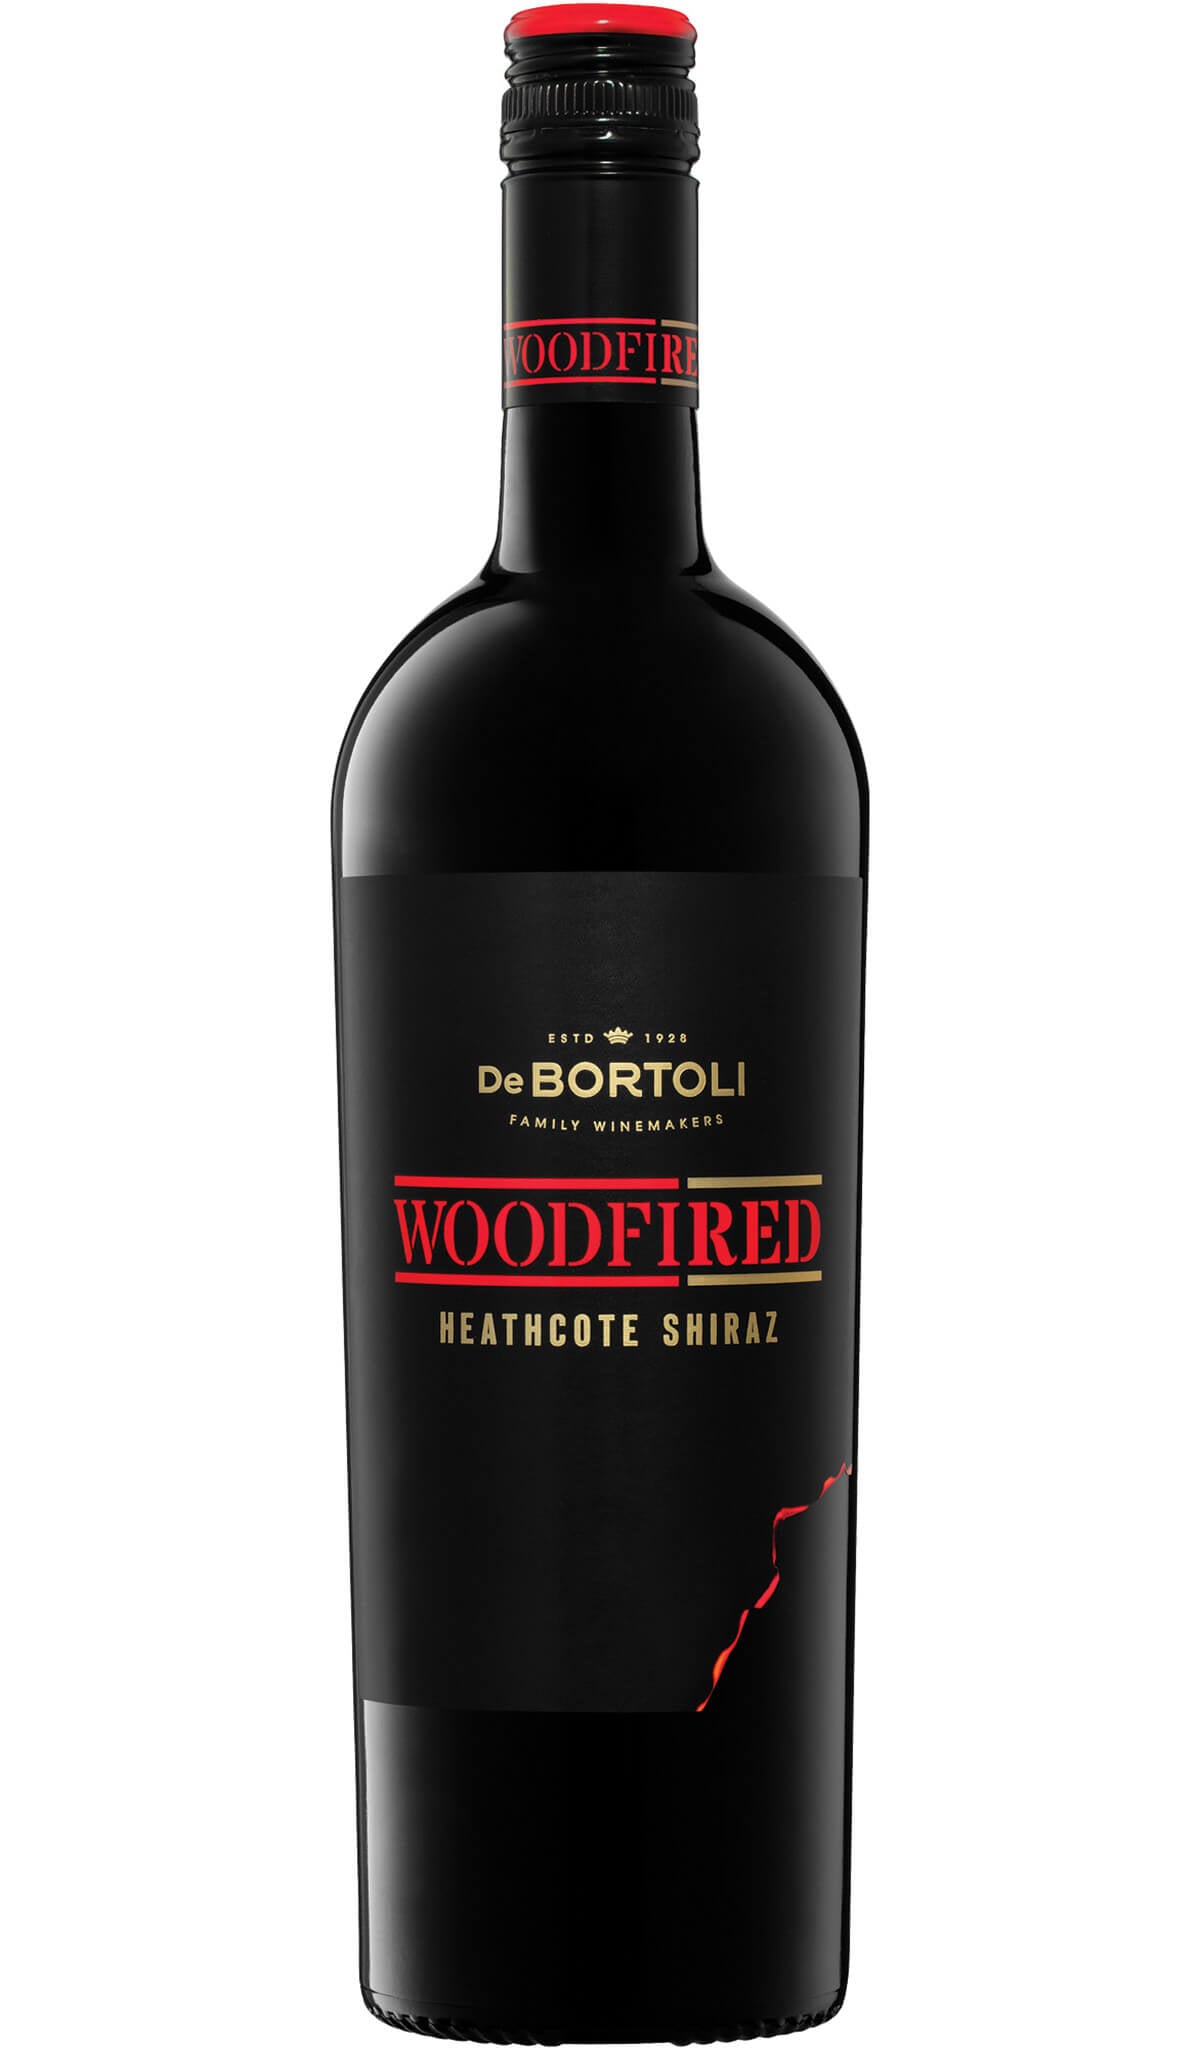 Find out more or buy De Bortoli Woodfired Heathcote Shiraz 2020 online at Wine Sellers Direct - Australia’s independent liquor specialists.